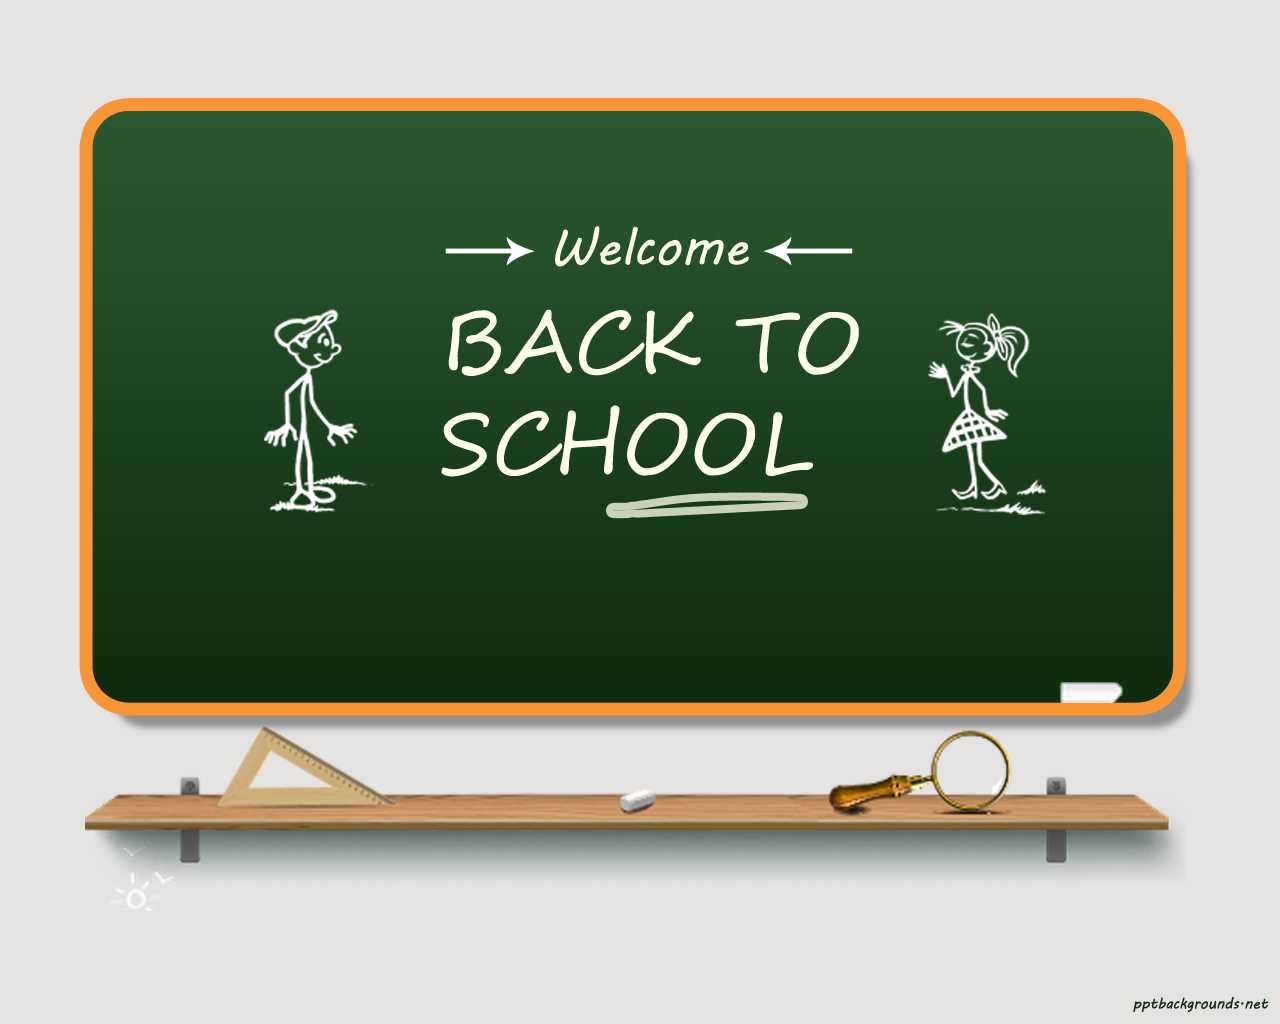 Back To School 2014 - 2015 Backgrounds For Powerpoint Within Back To School Powerpoint Template